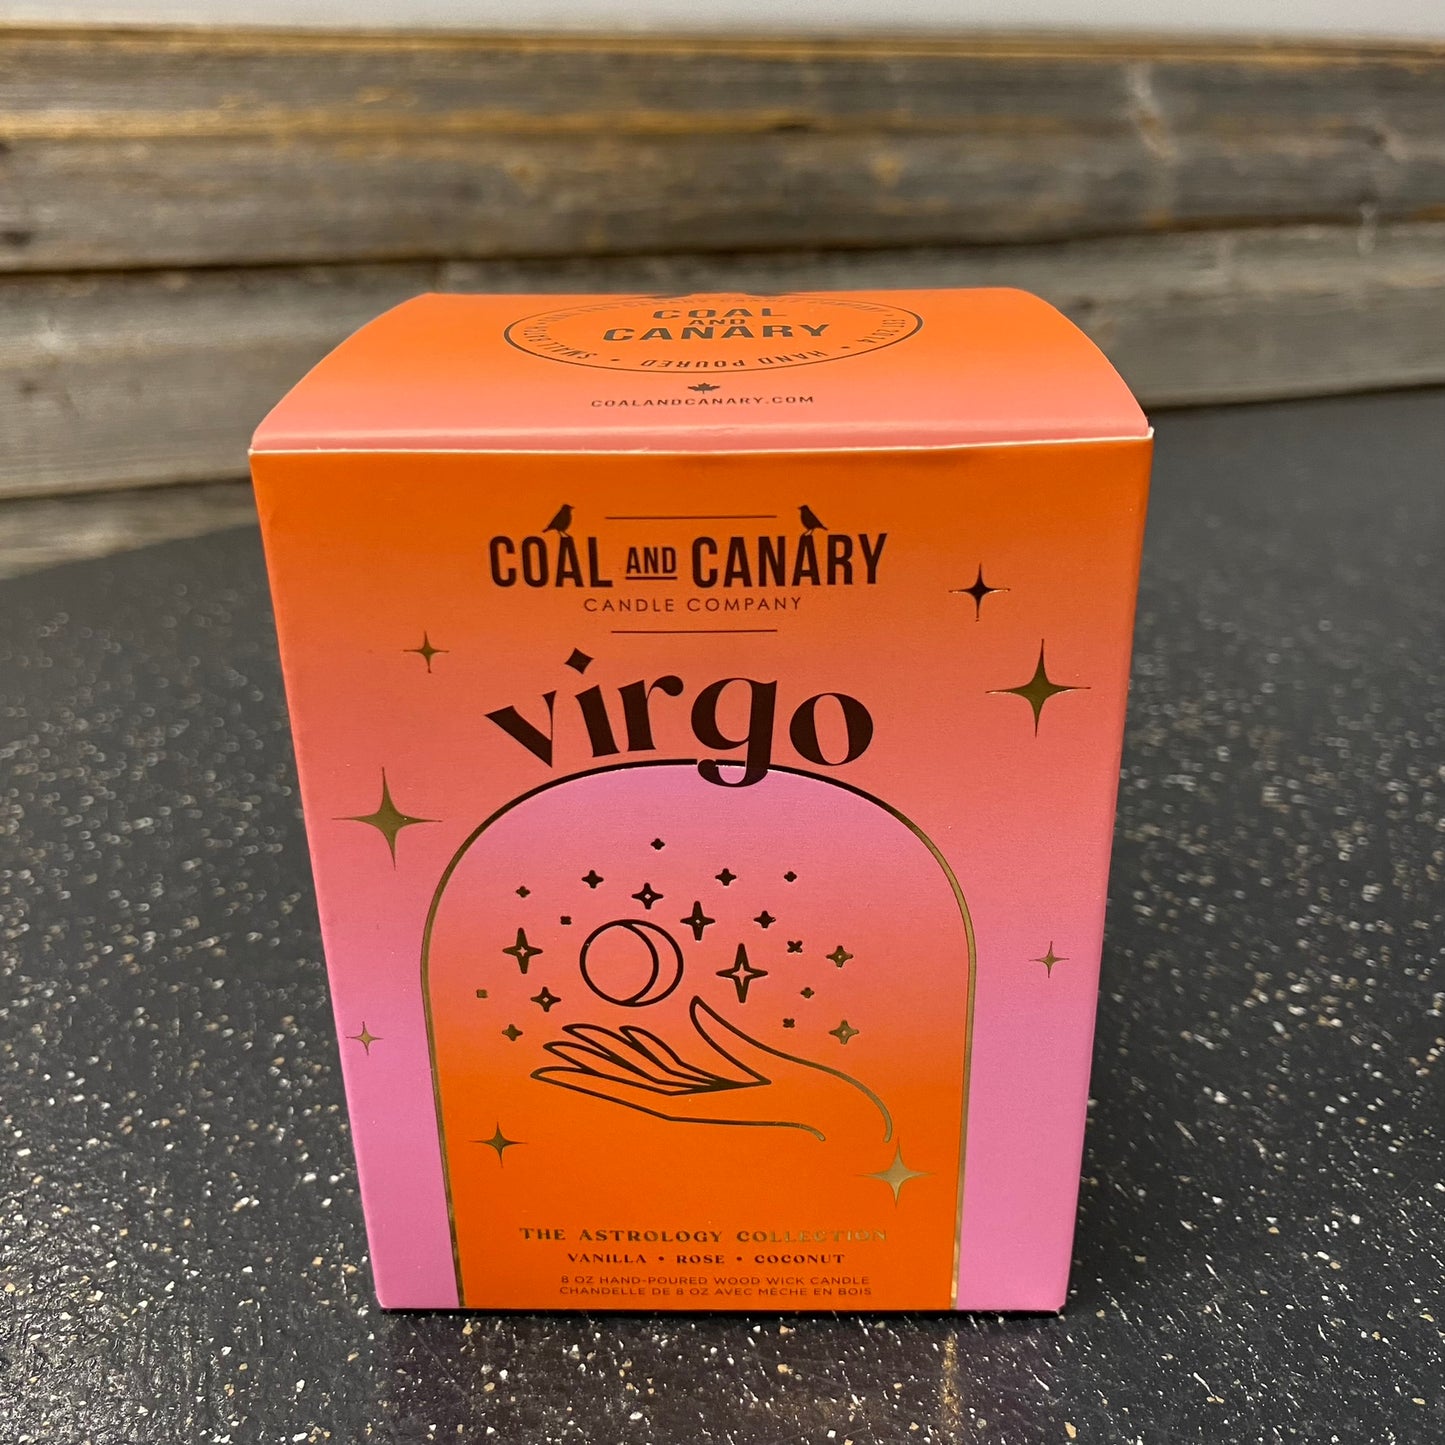 Virgo by Coal & Canary